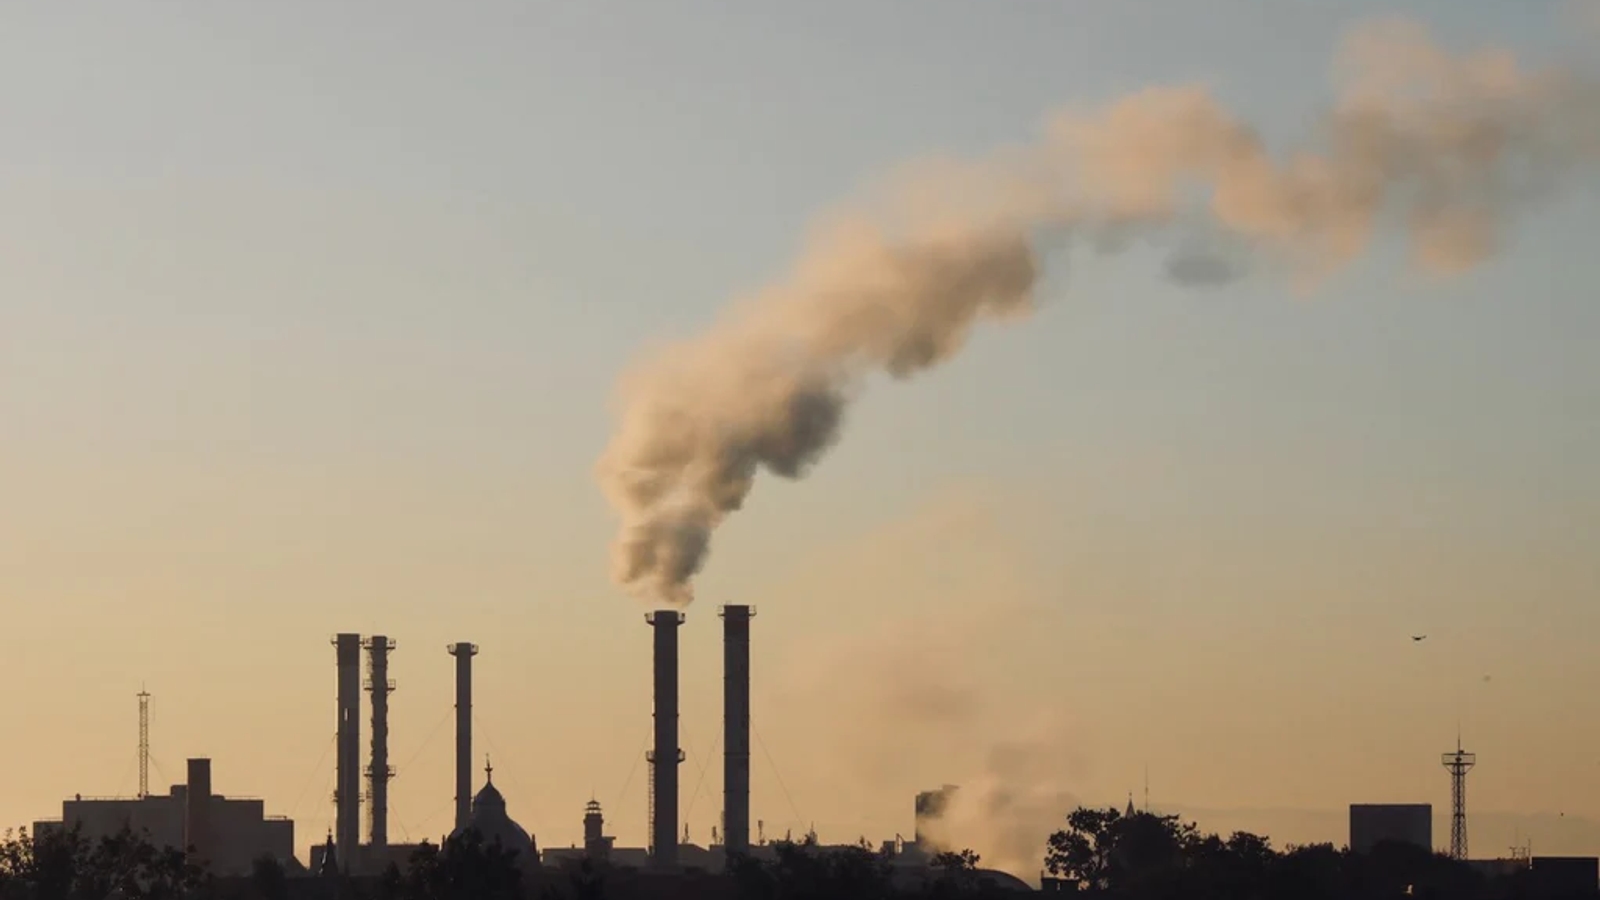 several smoke stacks silhouetted against an evening sky